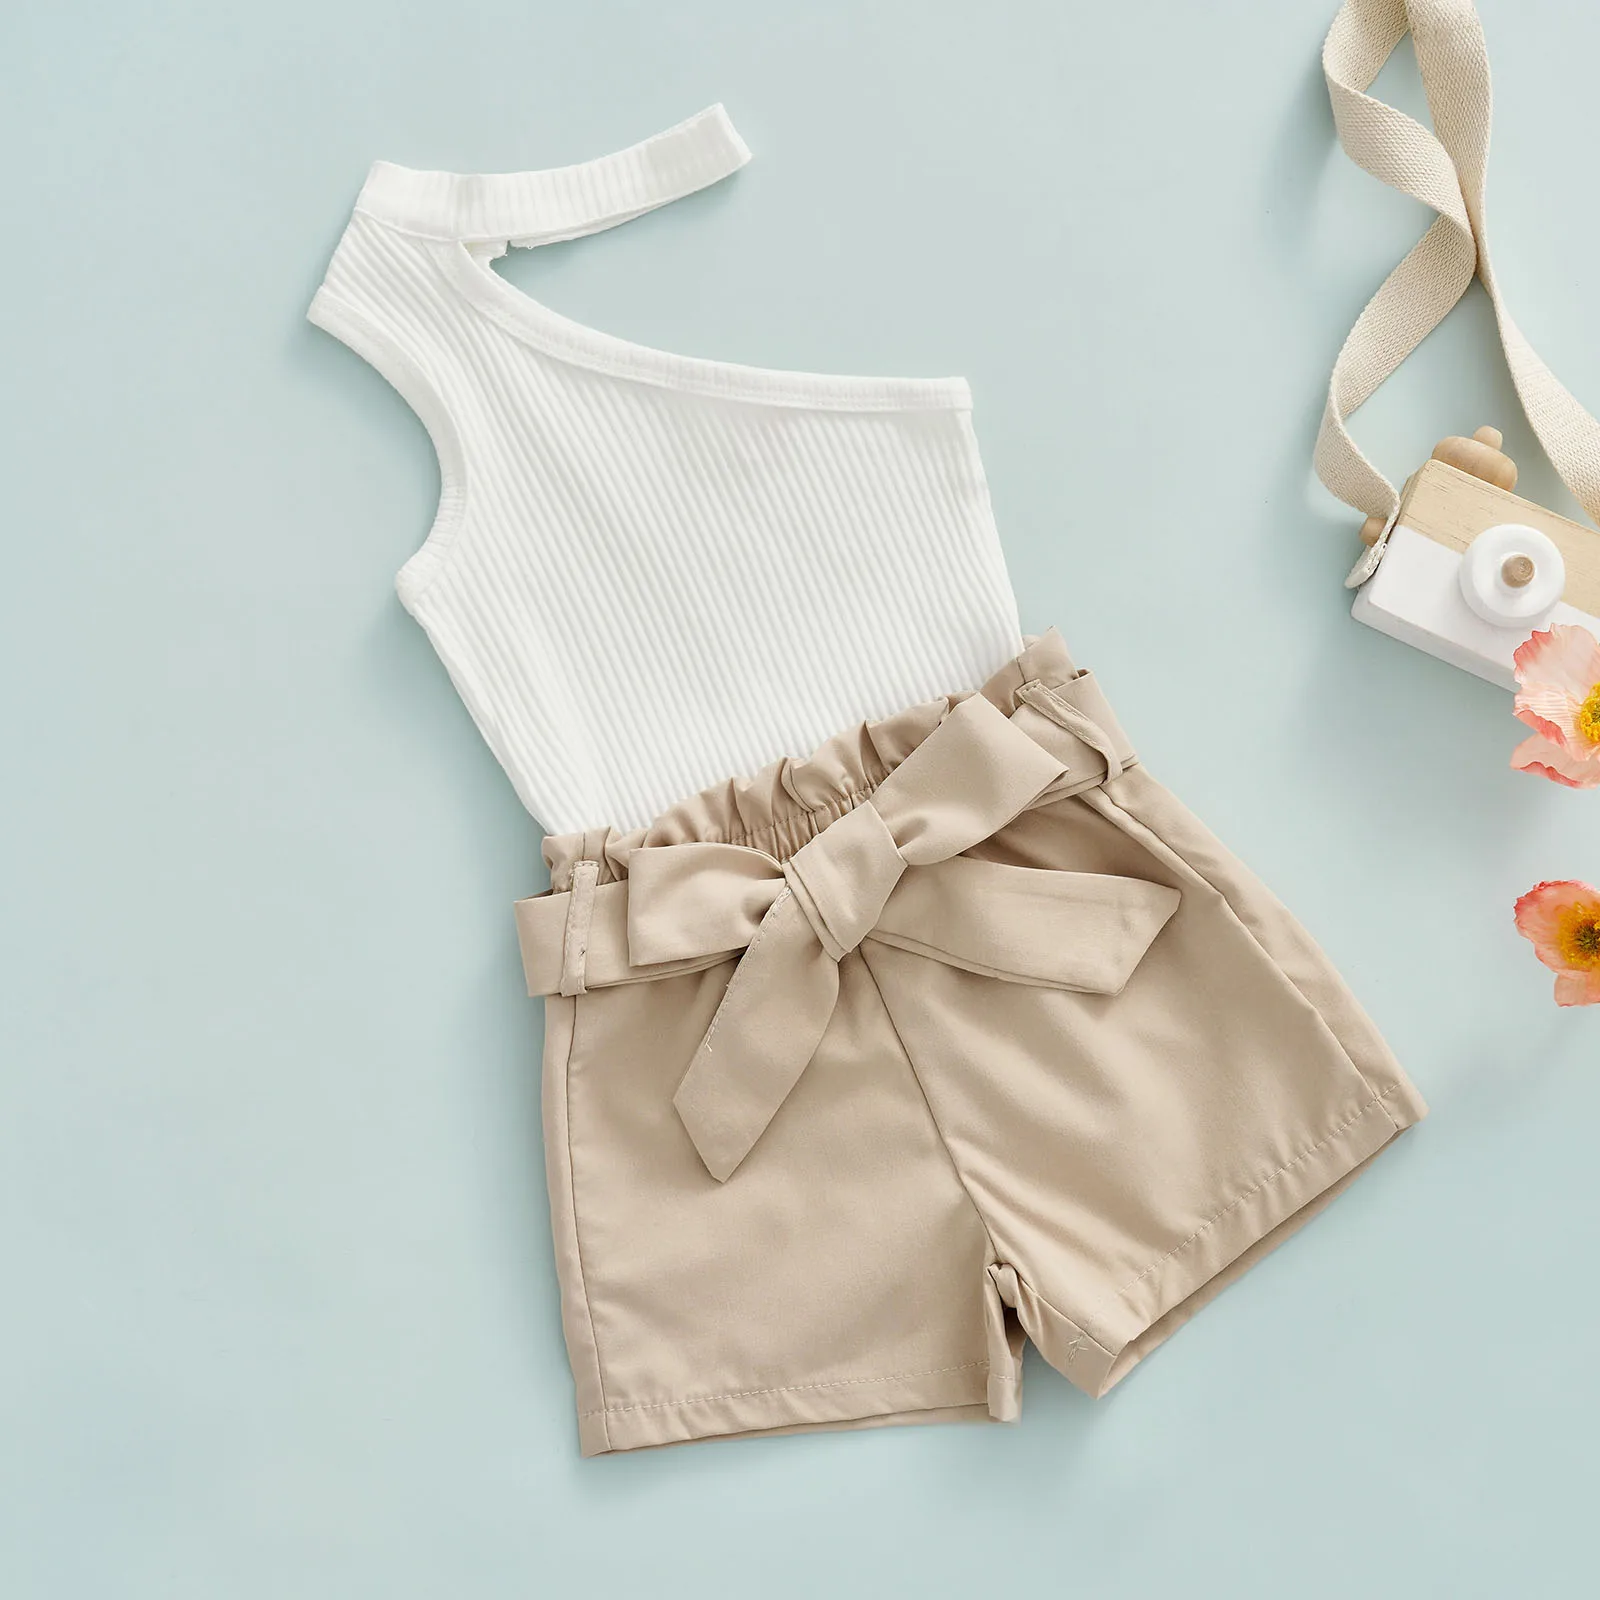 ma&baby 6M-4Y Summer Toddler Infant Kid Baby Girls Clothes Set One Shoulder Knitted Crop Tops Bow Shorts Fashion Summer Outfits Baby Clothing Set medium